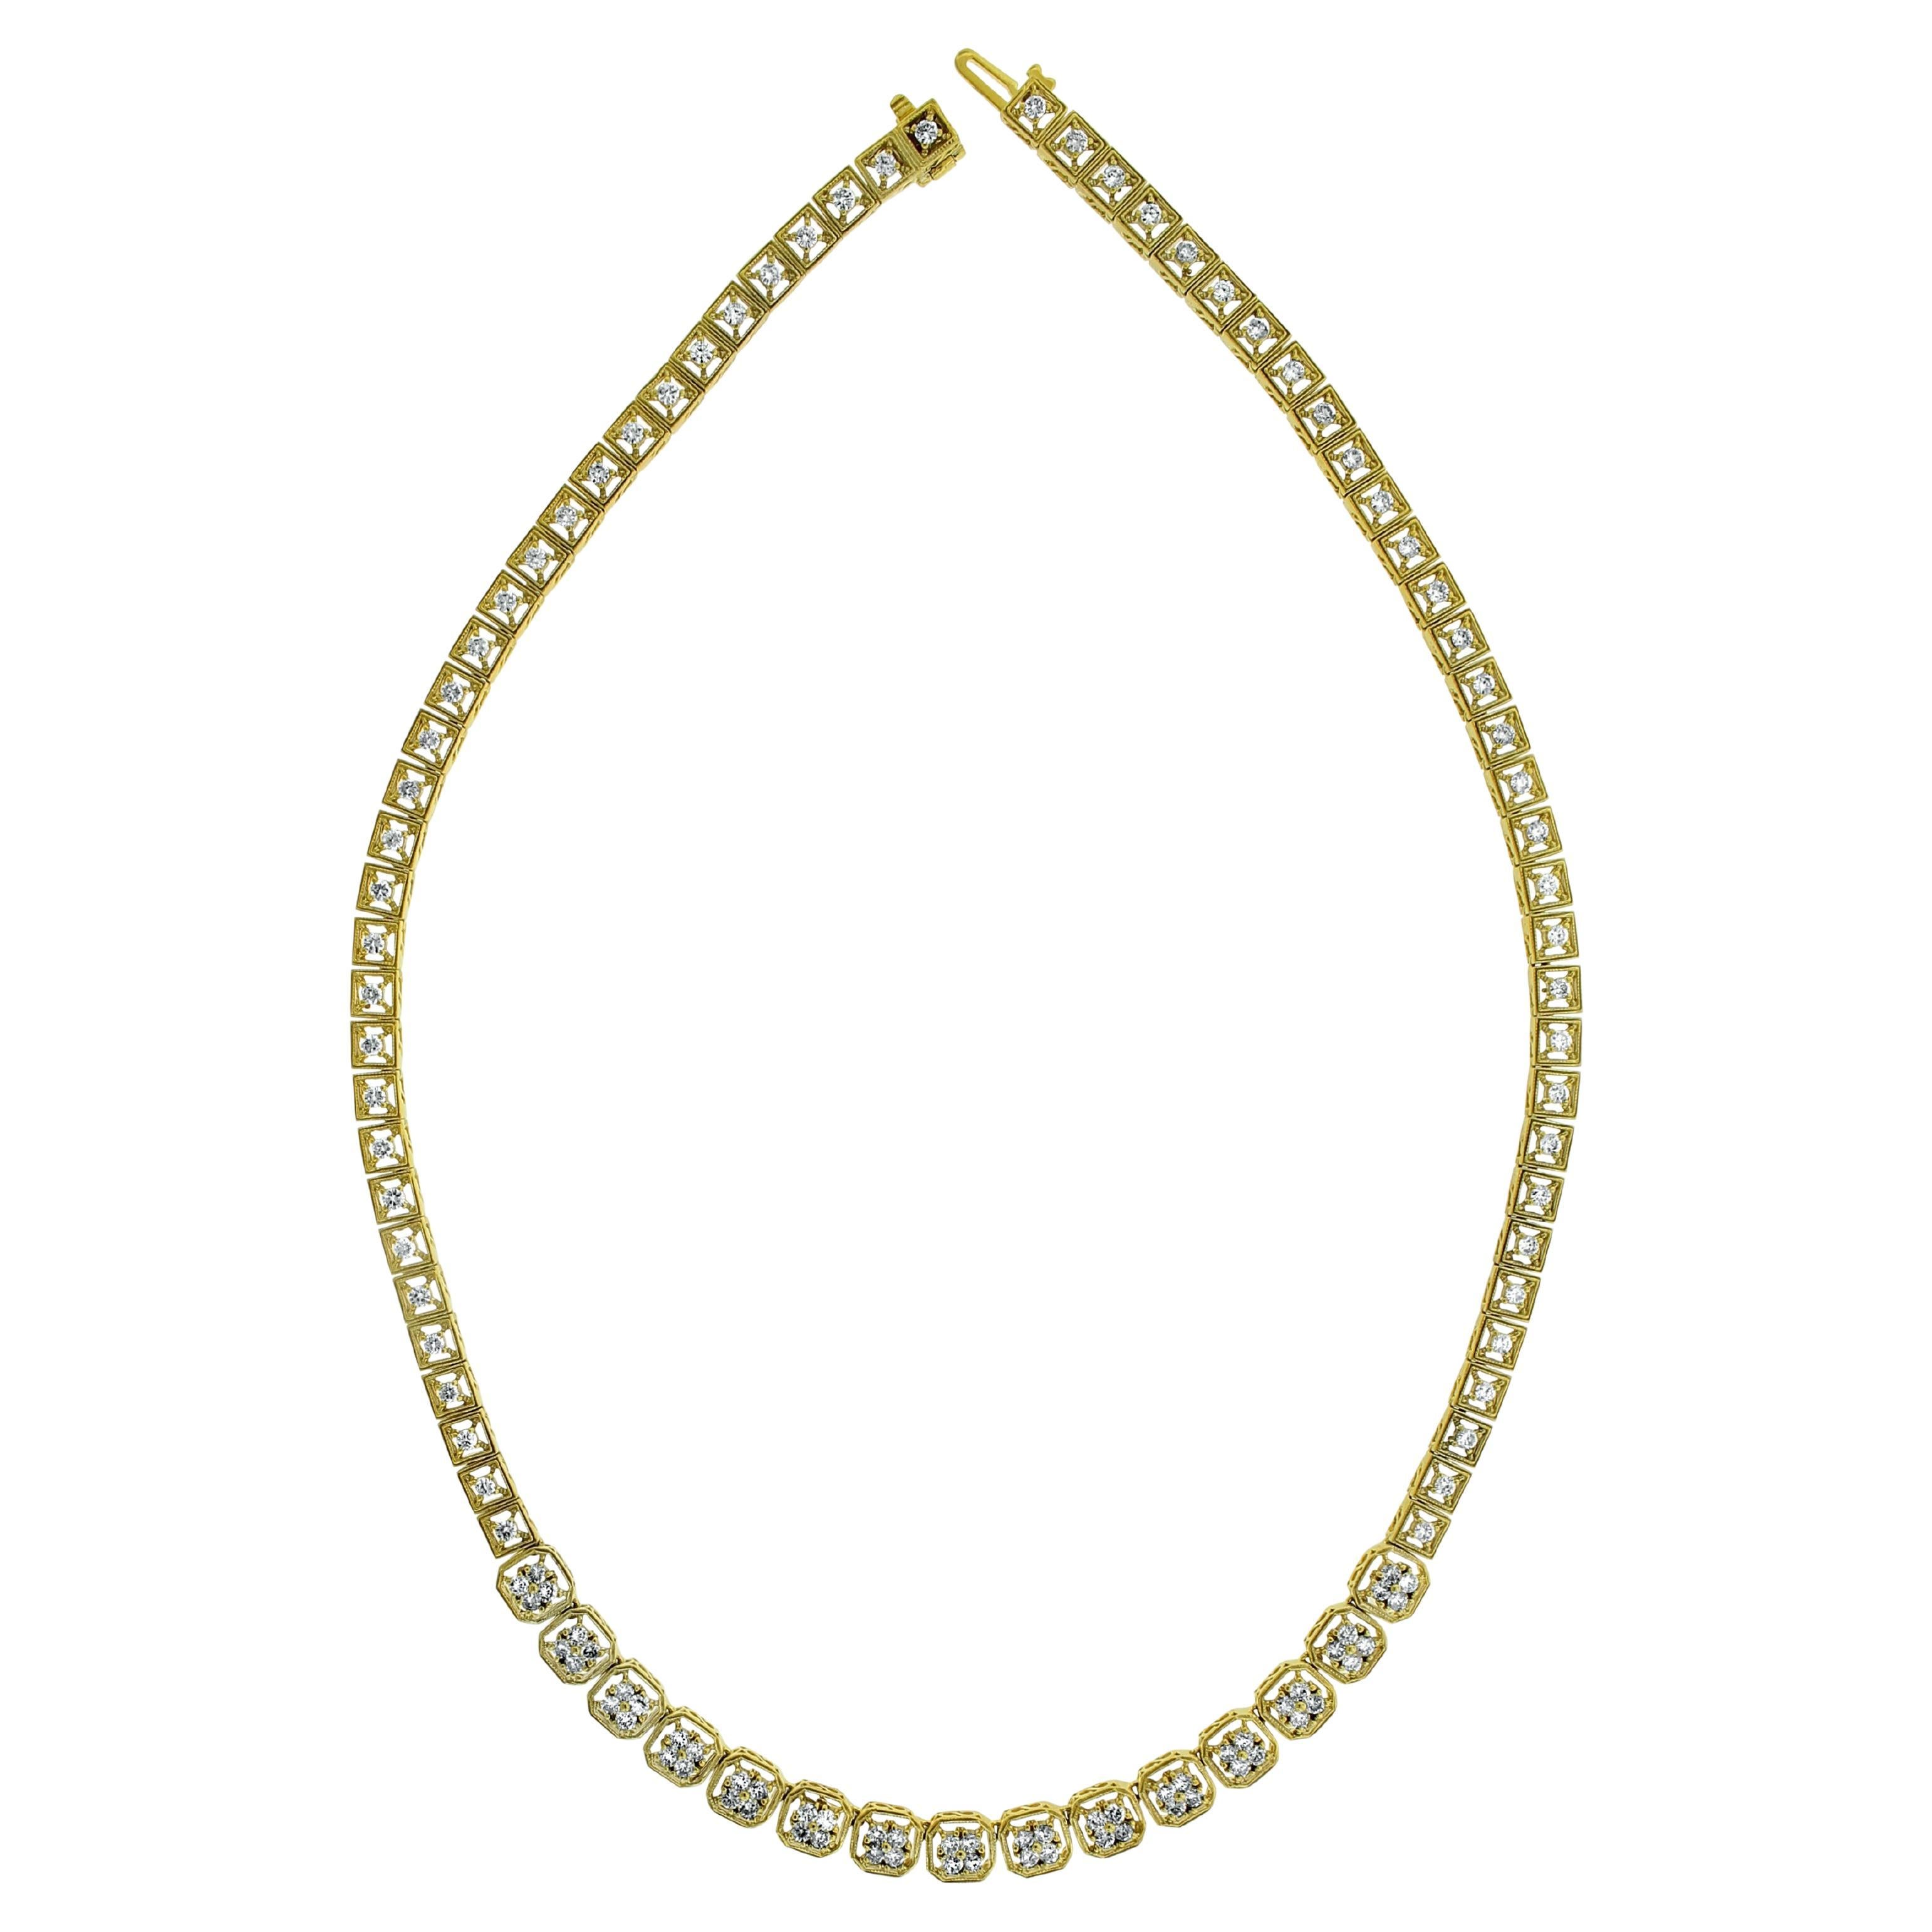 Beauvince Madeline Diamond Necklace, '4.30 Ct Diamonds', in Yellow Gold For Sale